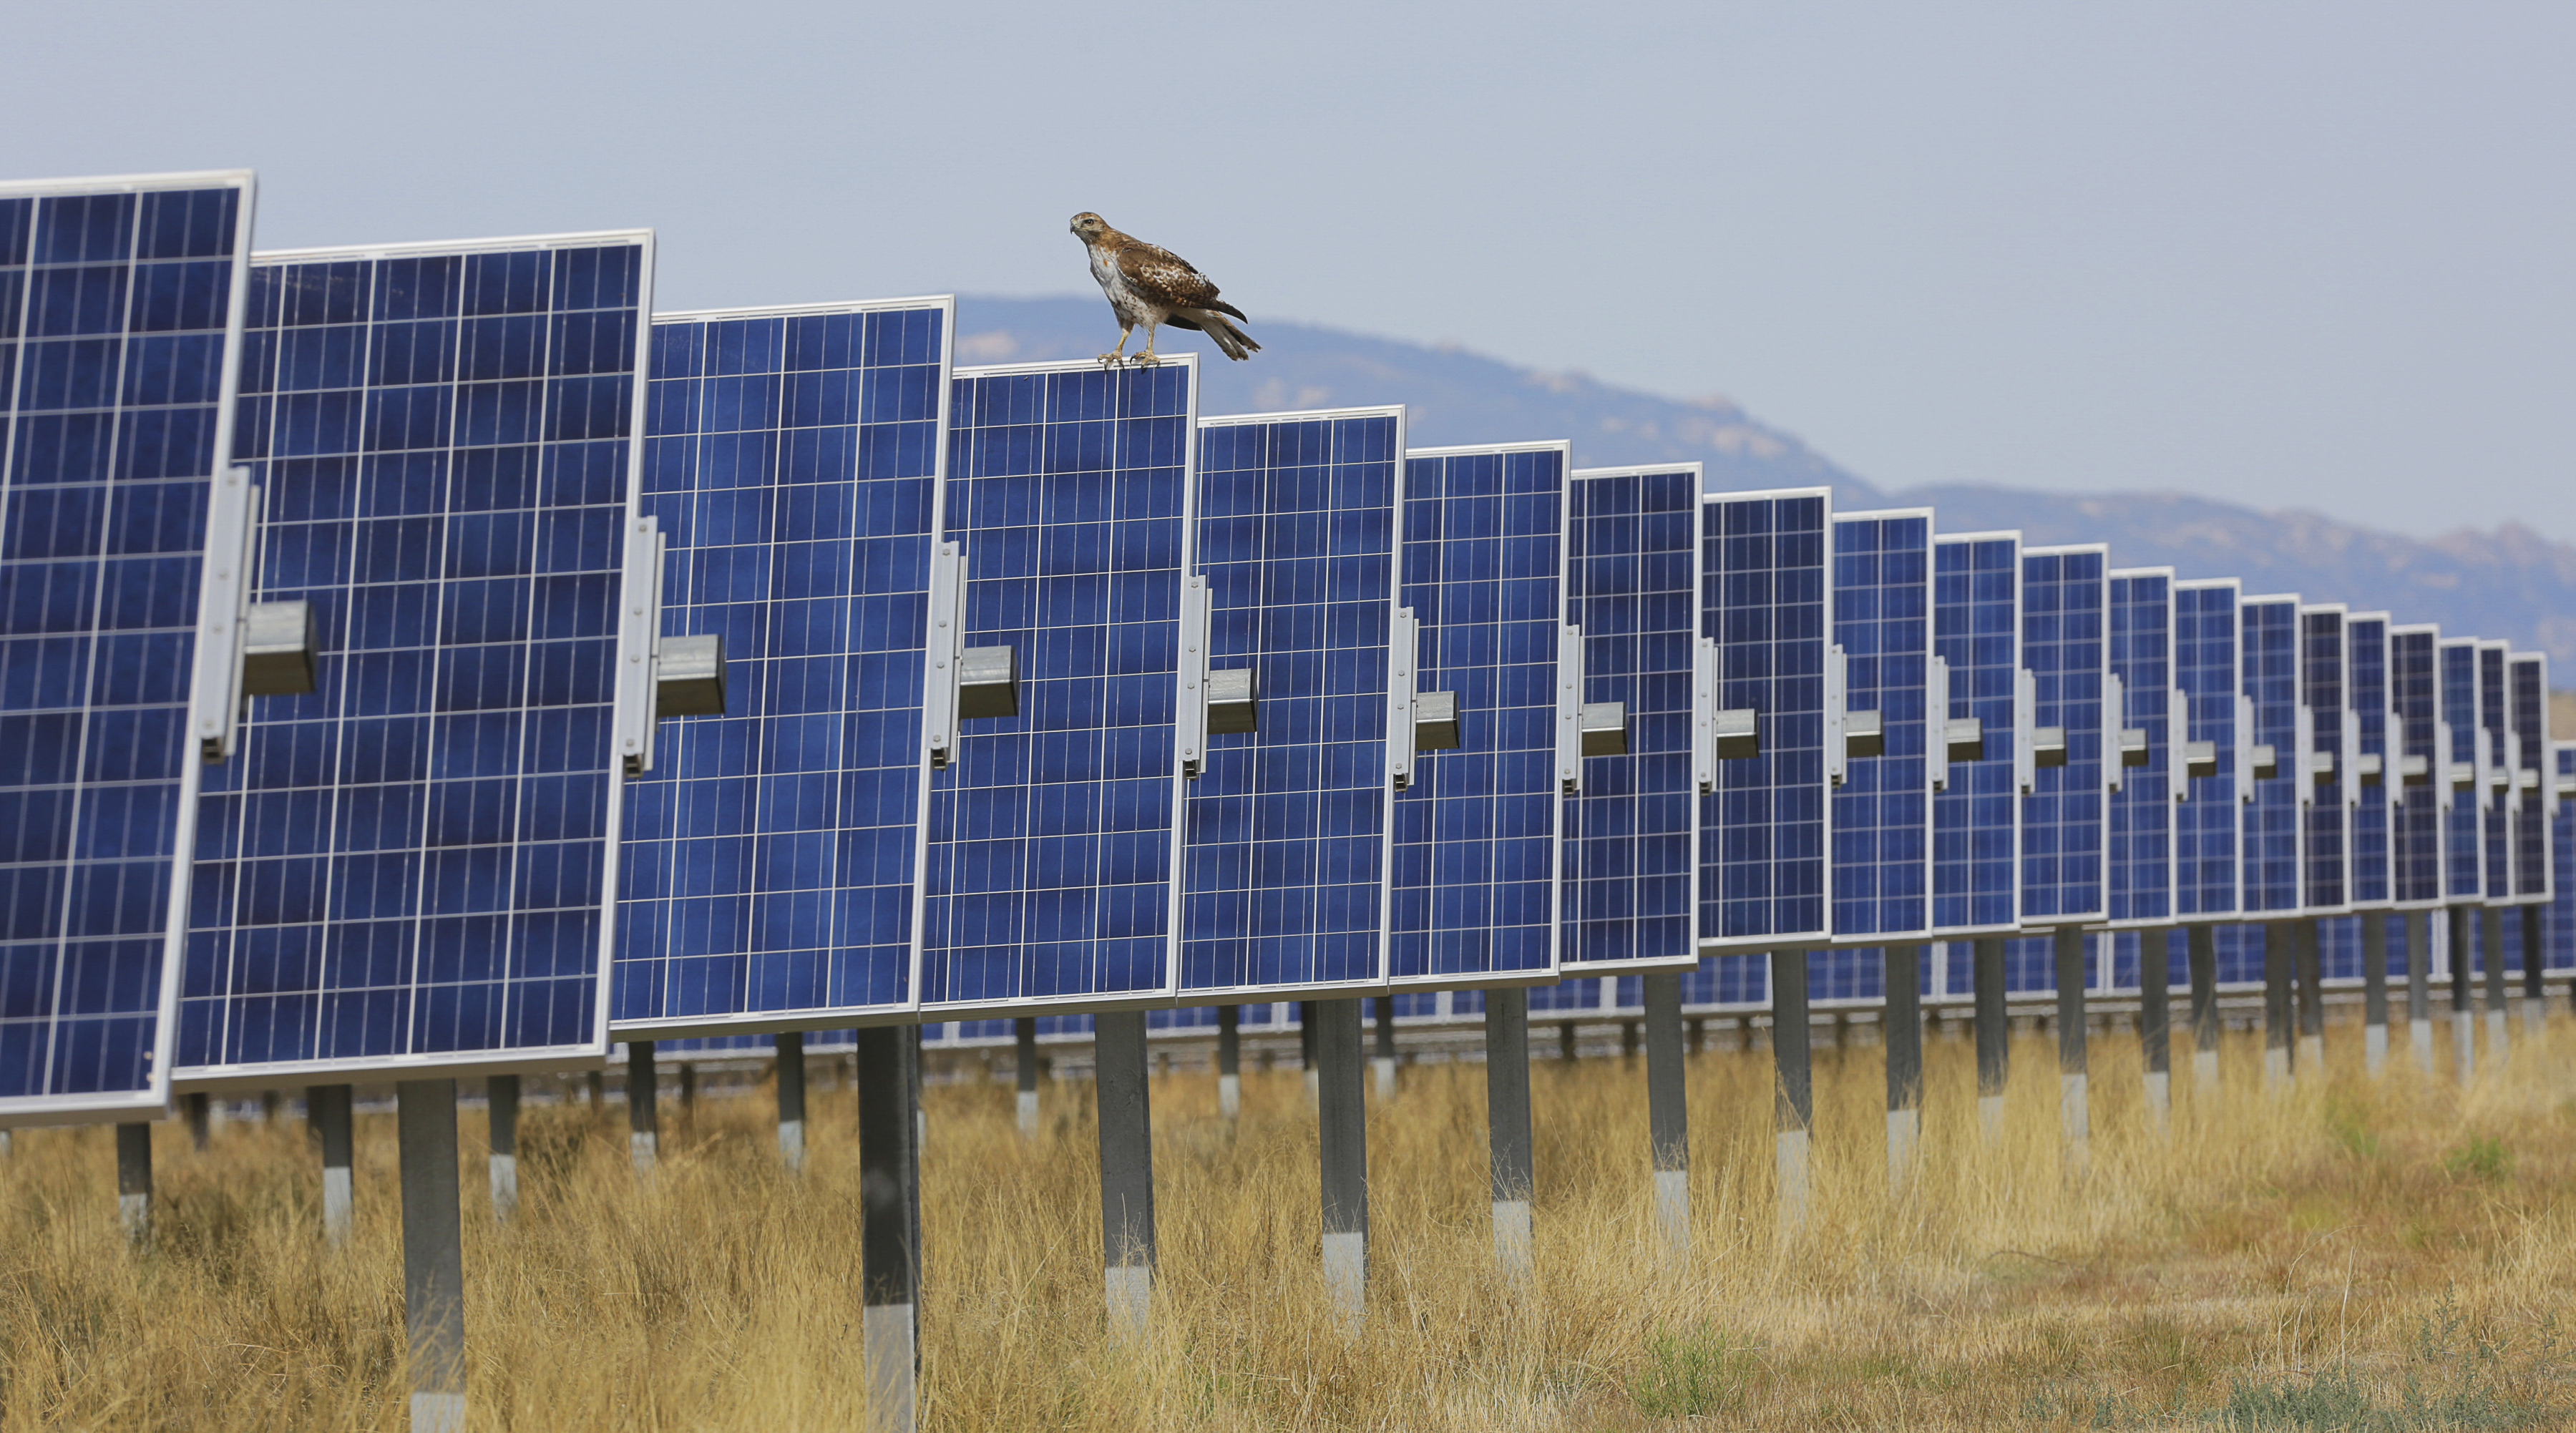 Five blue solar panels in a field with a raptor upon one of them.